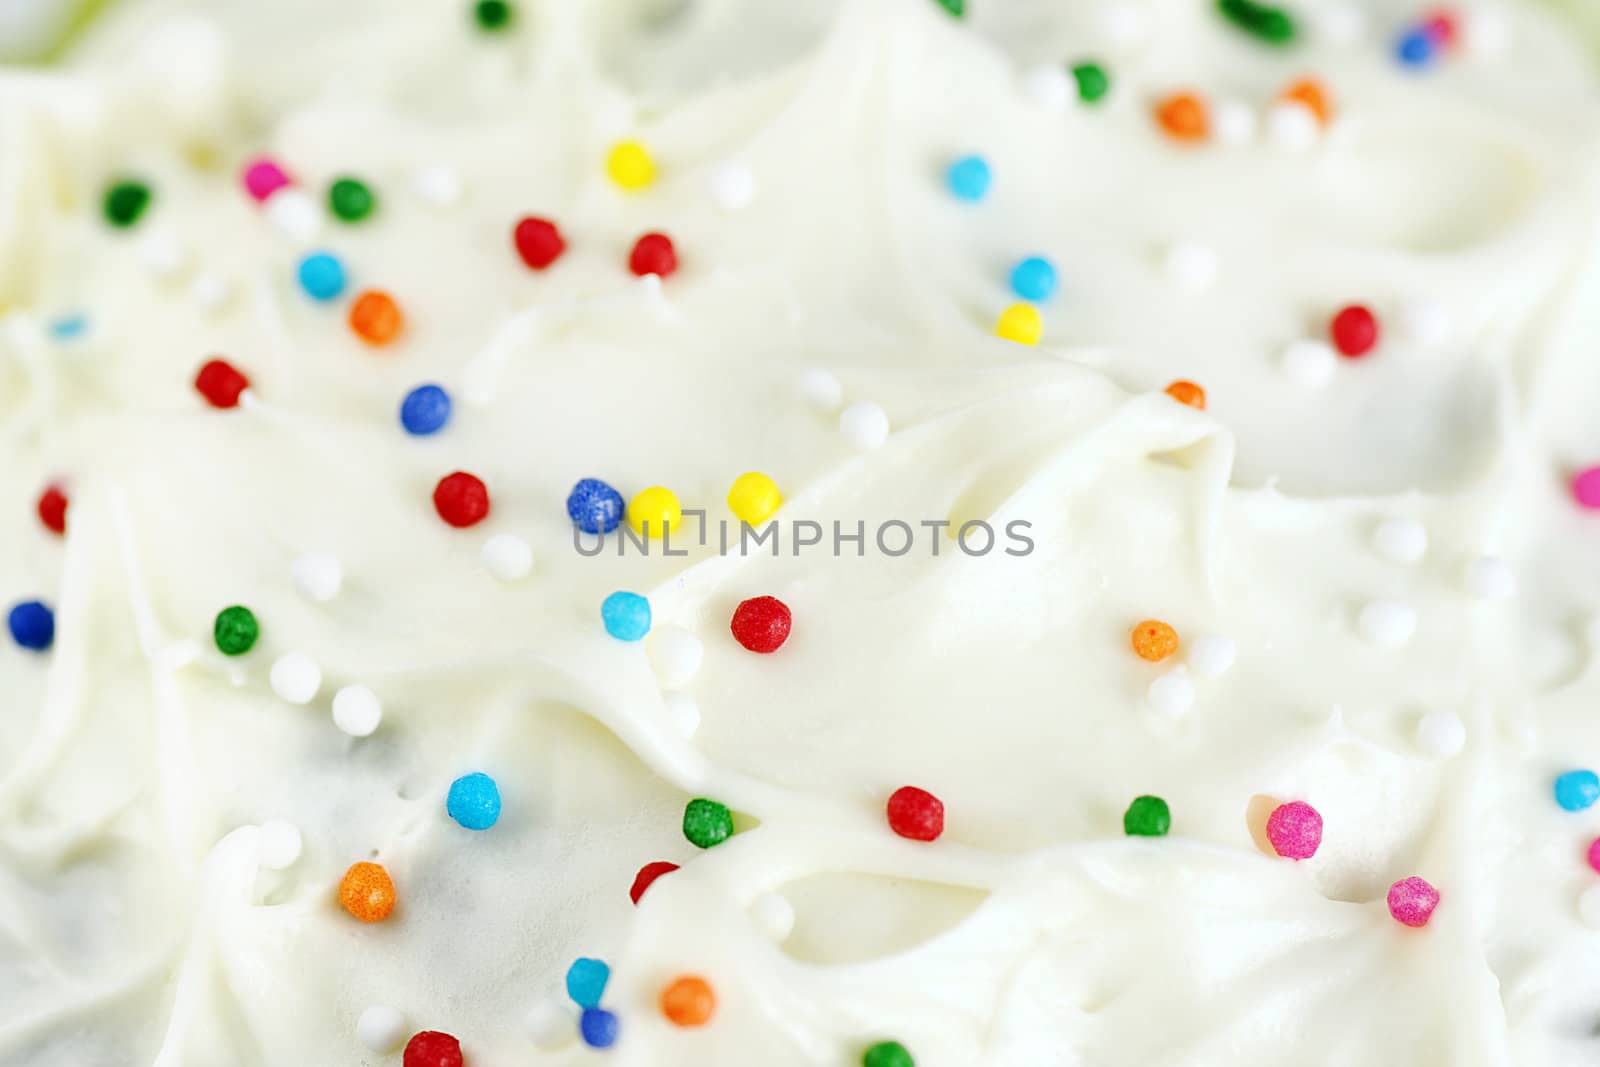 Great appetizing background of cream cheese cake frosting or icing with colorful sugar candy.